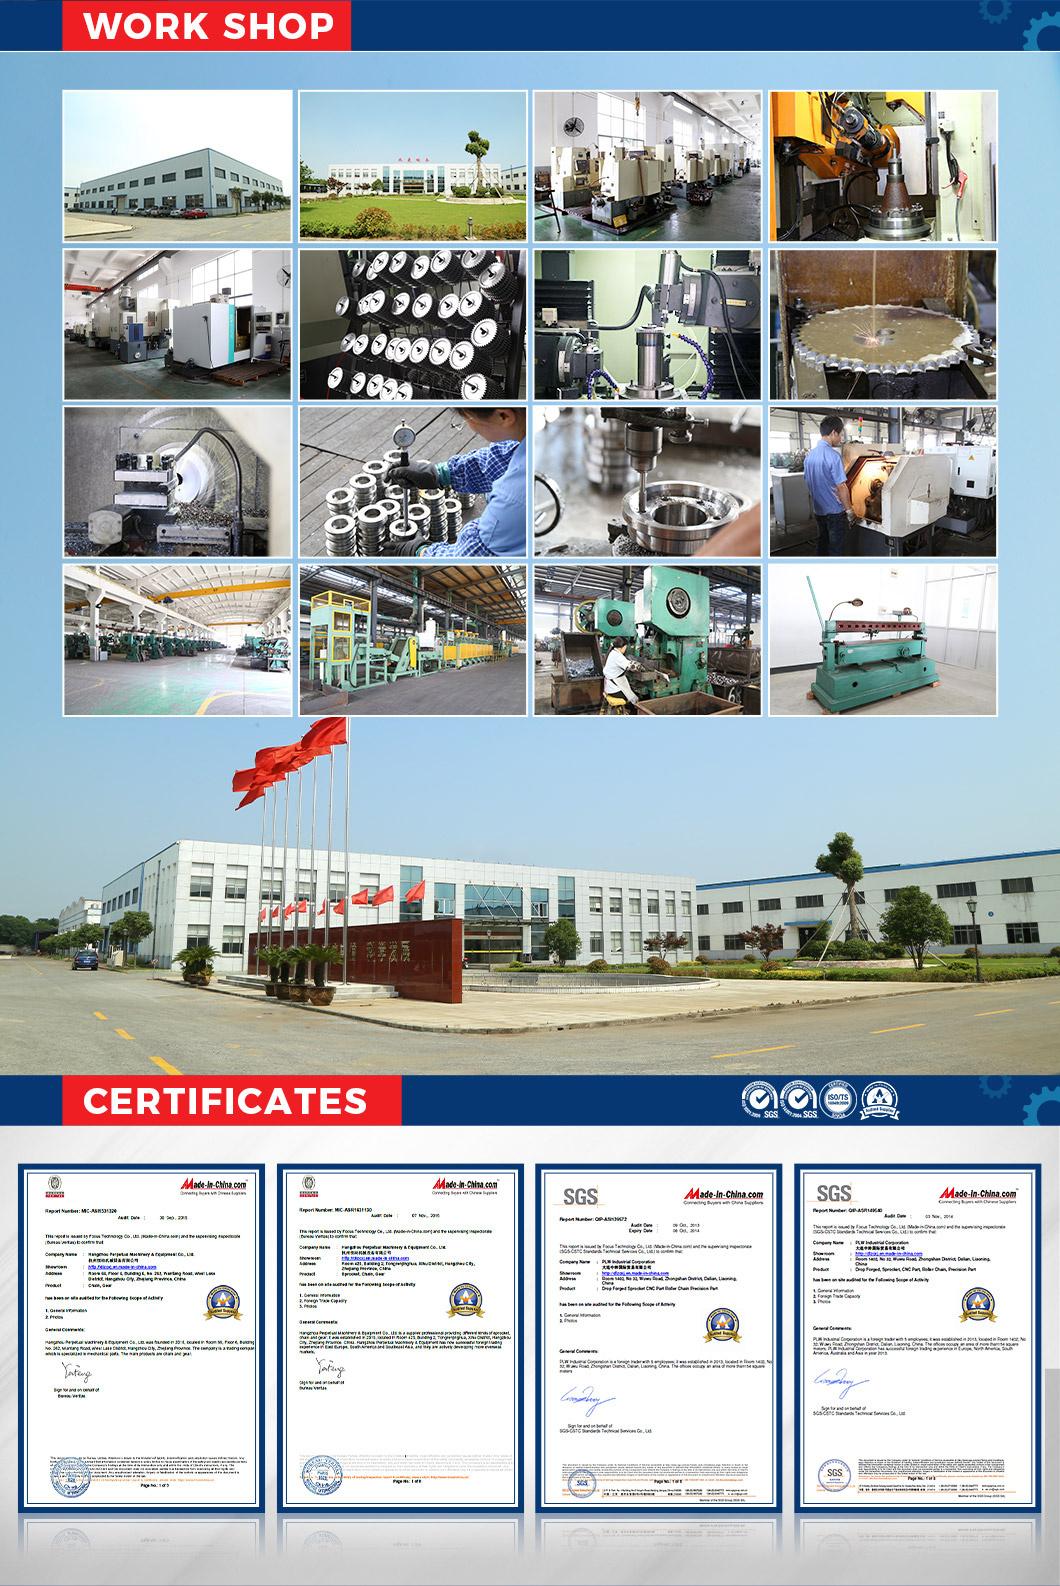 Competitive Price High Precision Mechanical Equipment Accessories Made to Order Sprocket